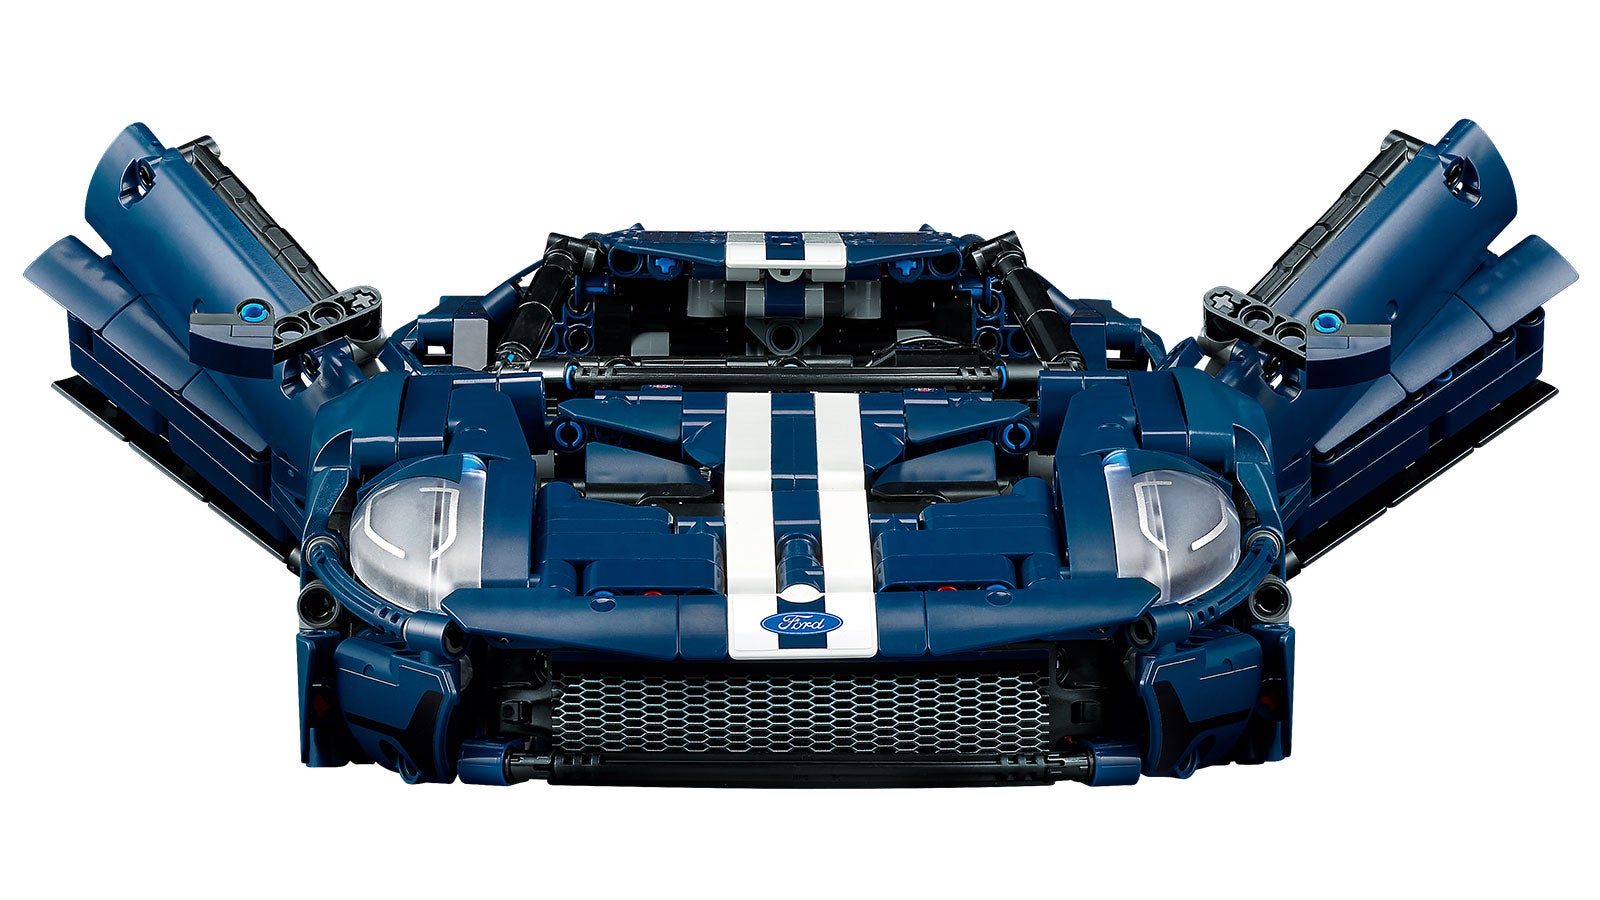 This $AU200 LEGO Kit Is the Only Way to Buy a New Ford GT